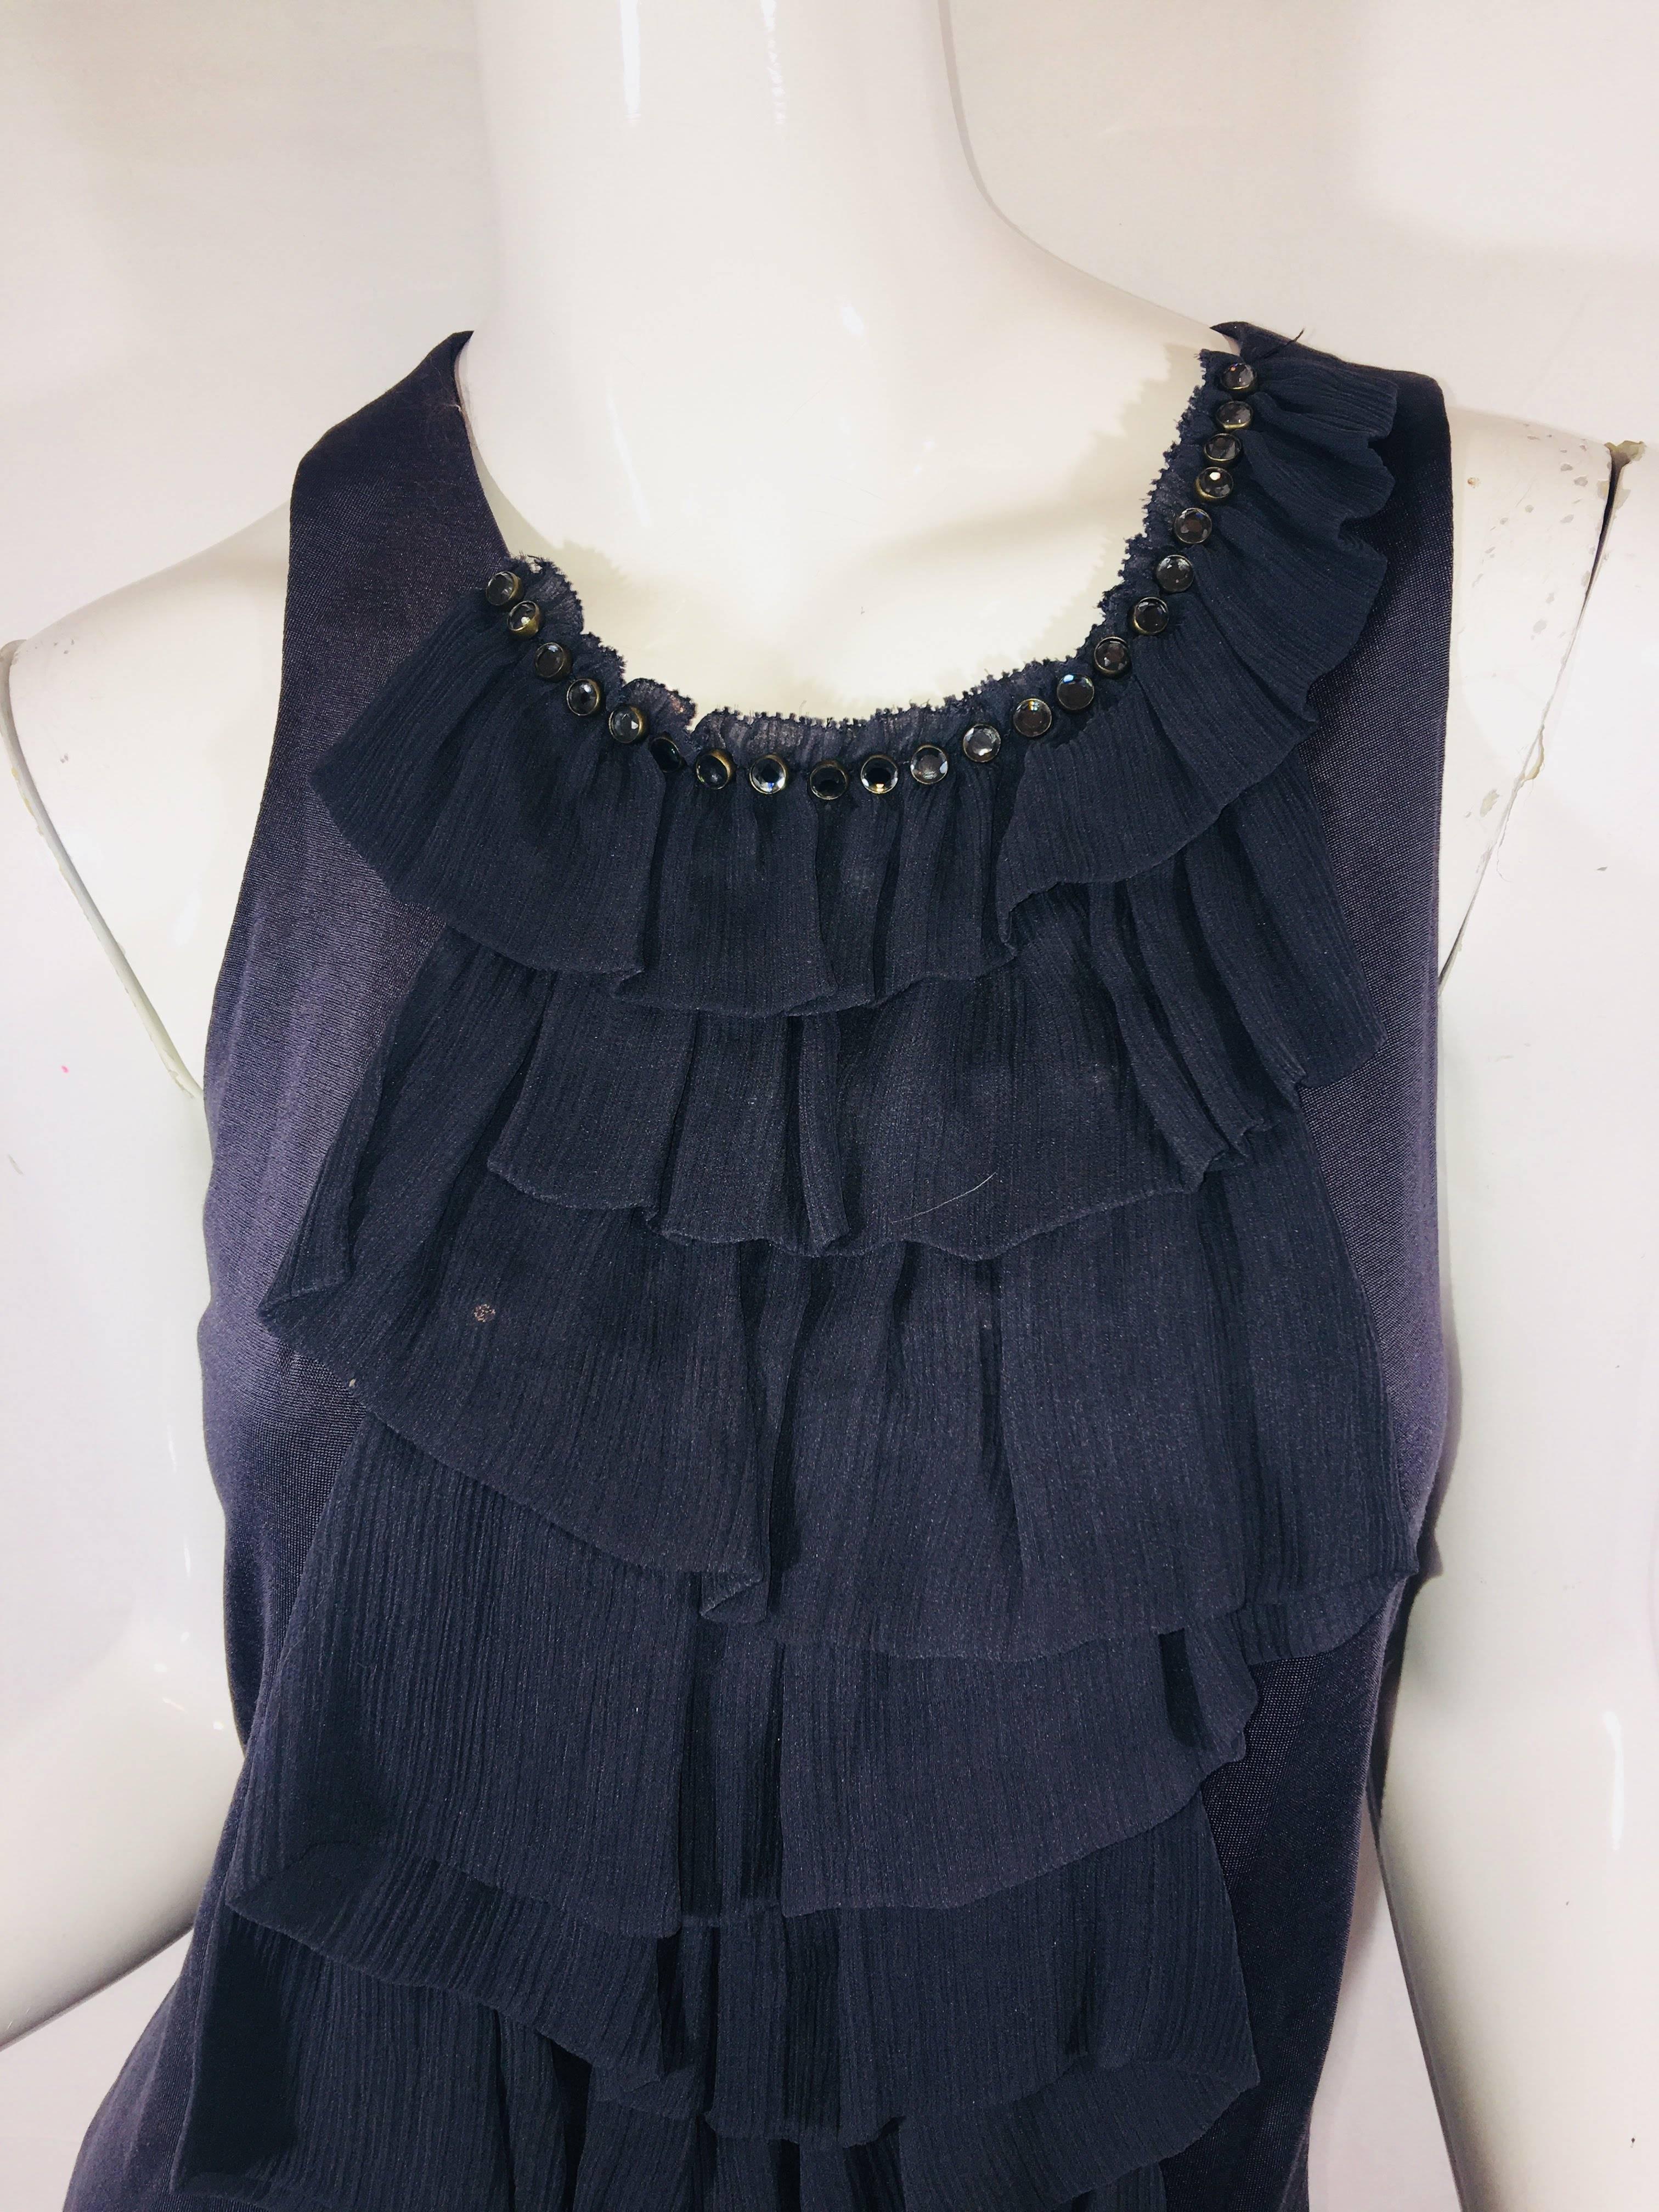 Phillip Lim Sleeveless Top with Slip Back, Ruffled Front and Jeweled Collar.